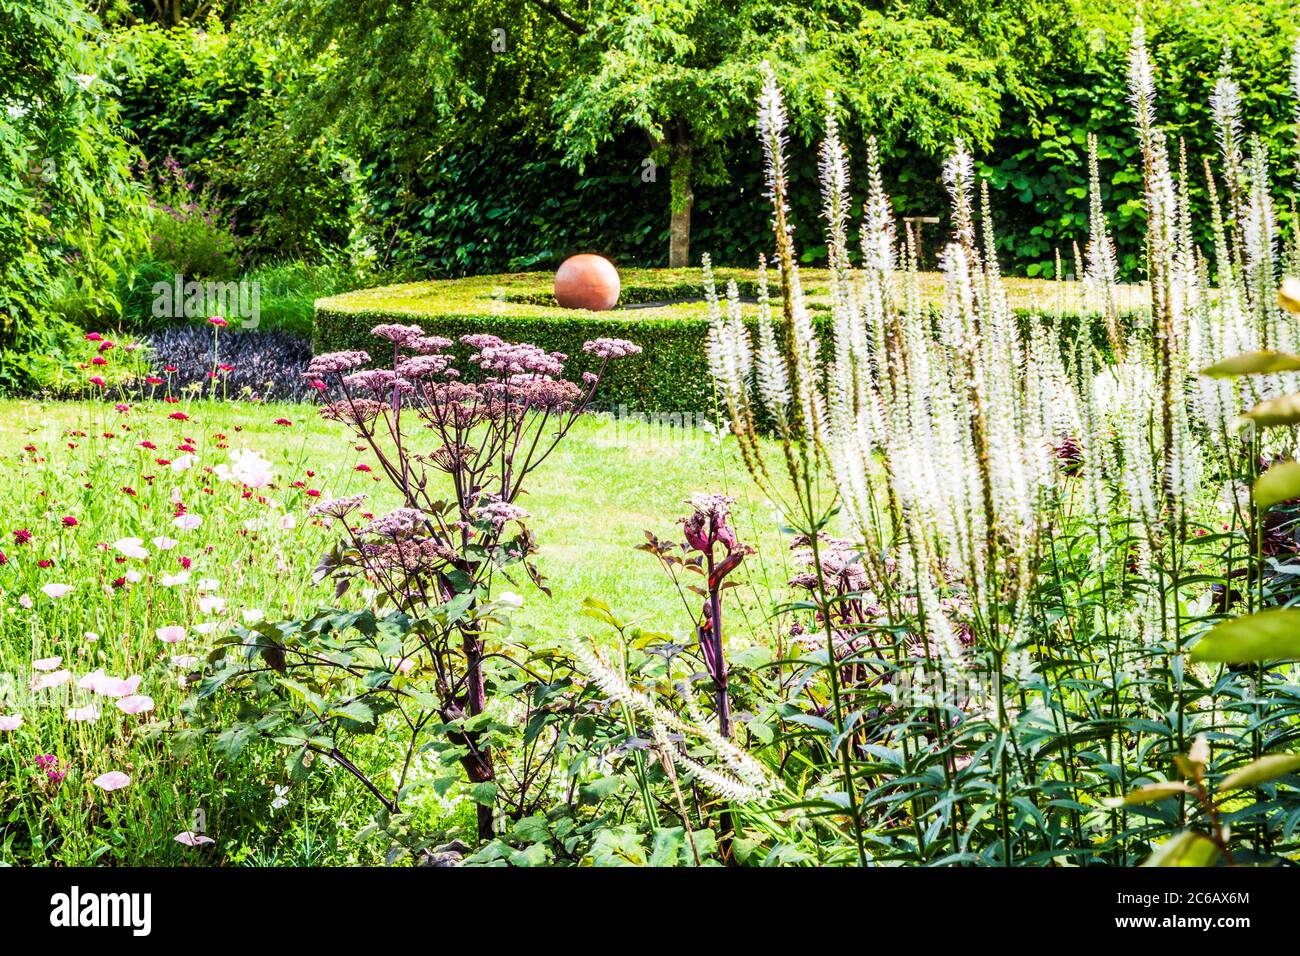 A large plant container used as a focal feature in a summer garden. Stock Photo